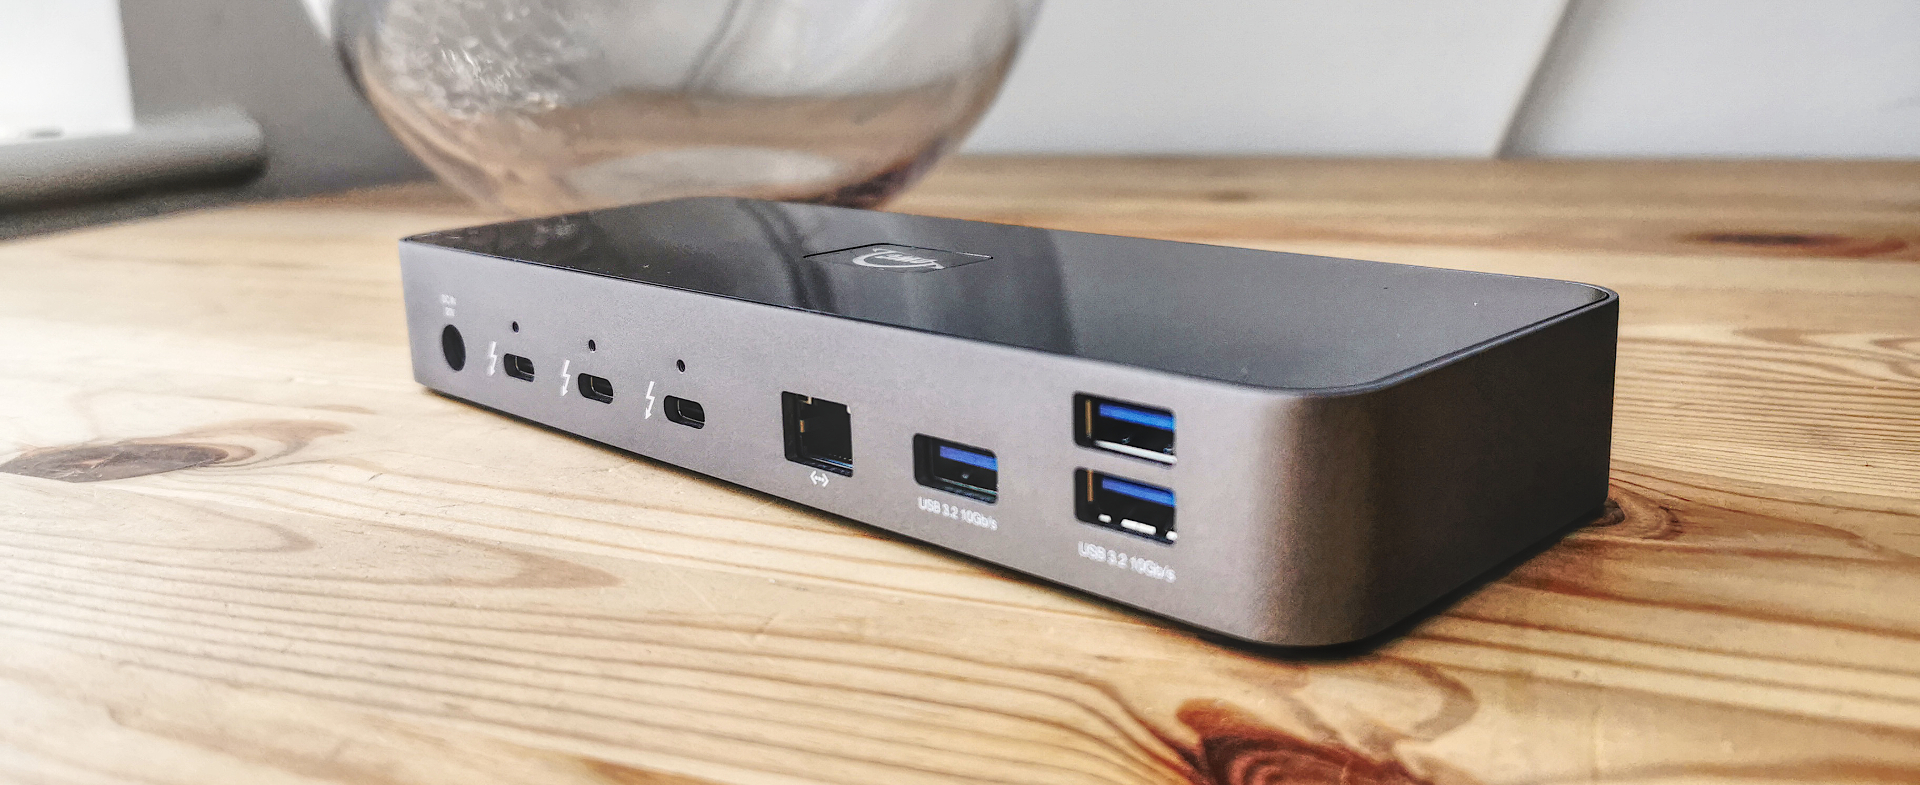 OWC Thunderbolt Dock review